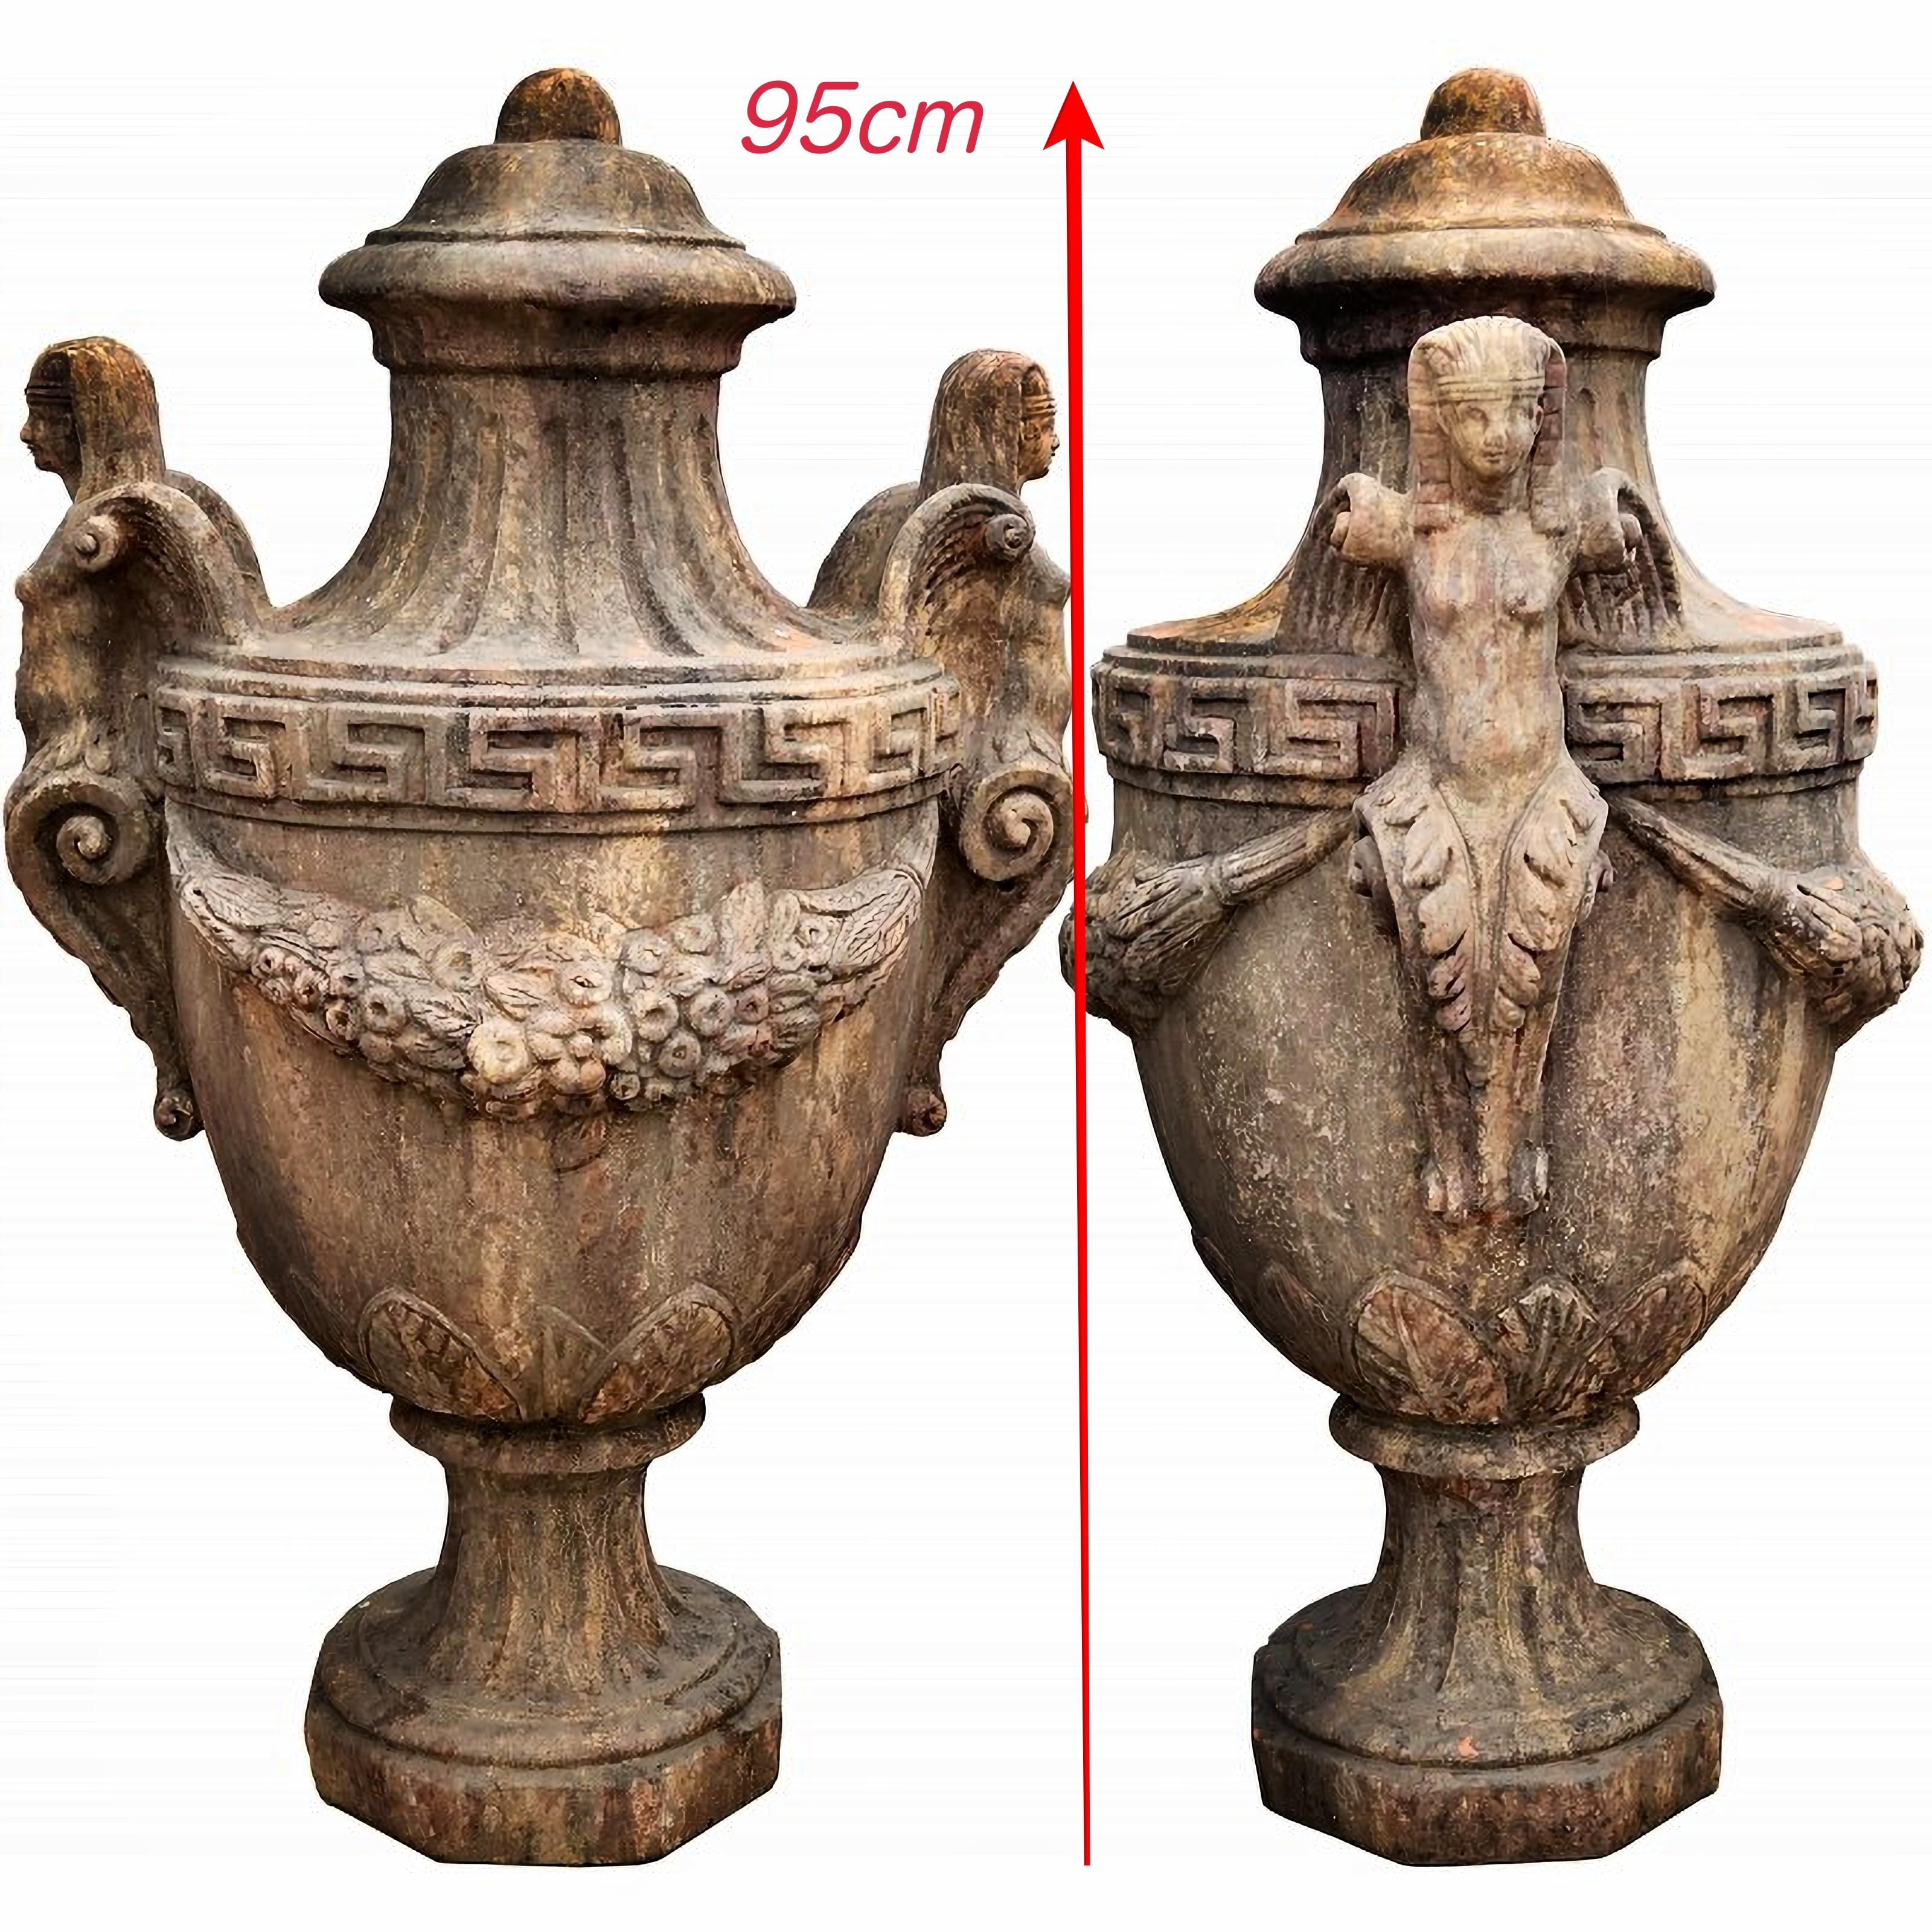 EMPIRE VASE
- PILLAR GOBLET WITH SPHINXES H 95 CM end 20th Century

Beautiful Napoleonic Empire vase with sphinxes, fret, two large festoons and leaves rising from the base. Empire vase of the Egyptianizing type.
Octagonal base Ø 28 cm

HEIGHT 95